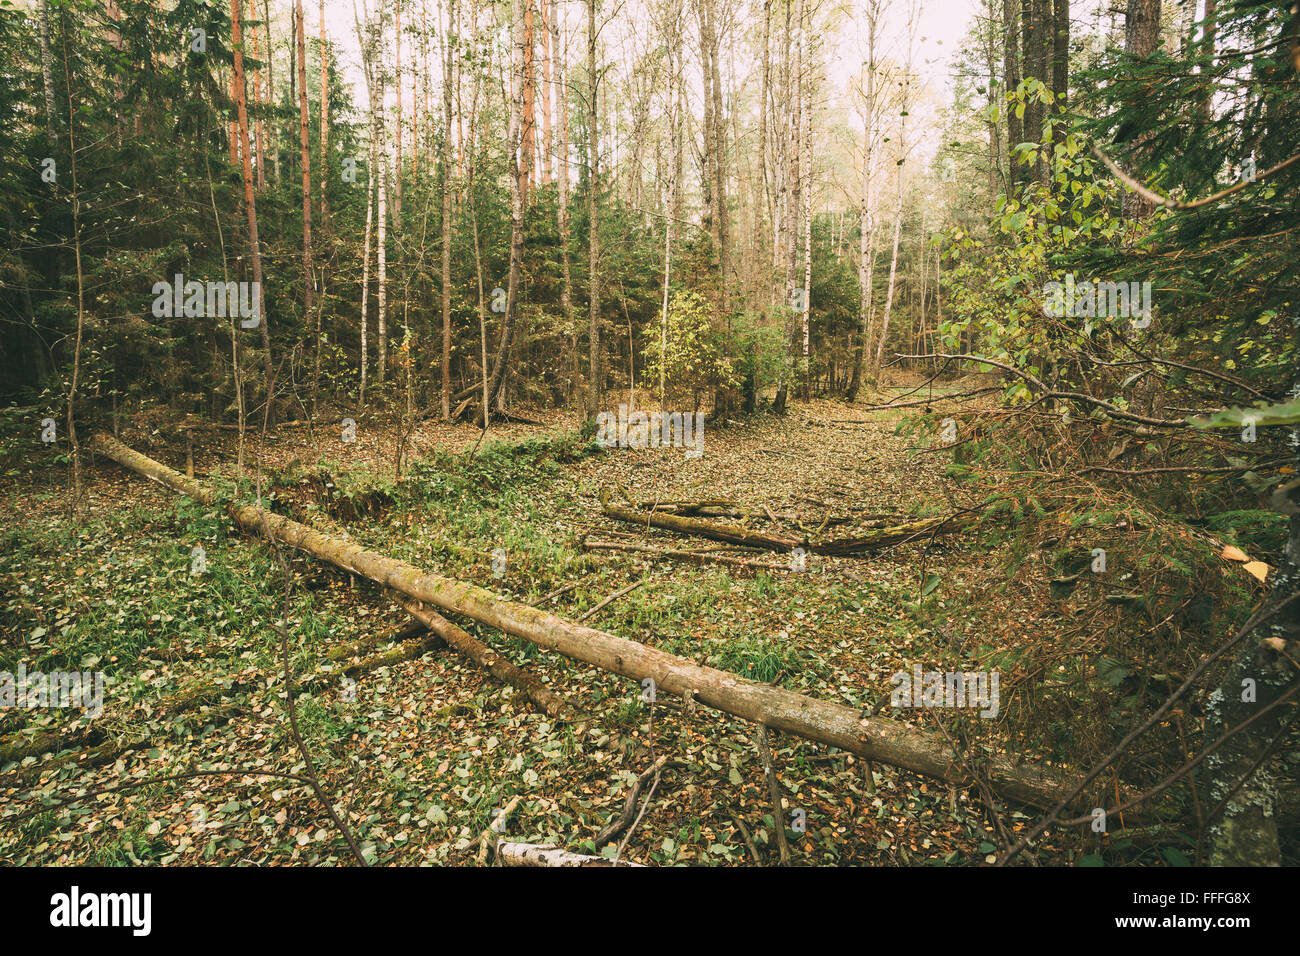 Wild autumn forest. Fallen trees in forest reserve. Stock Photo